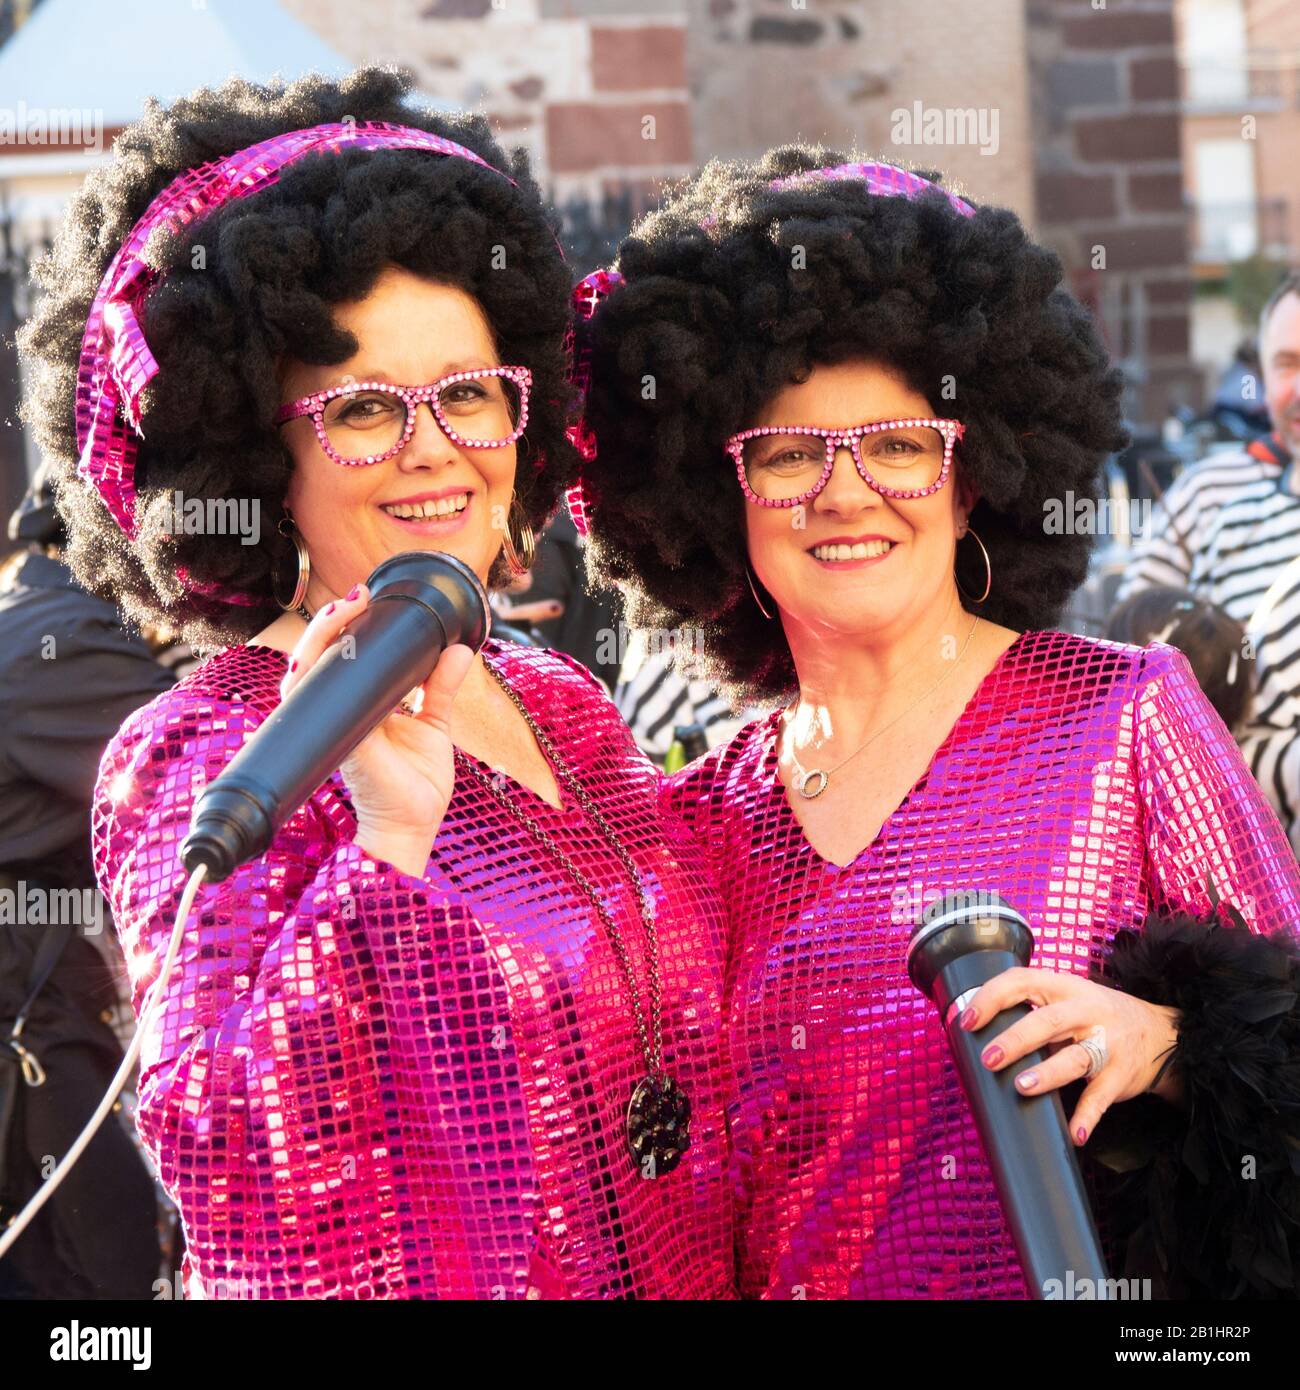 two women dressed as singers, with wig and brightly colored dress  Herencia, Castile-La Mancha, Spain February, 22, 2020 Stock Photo